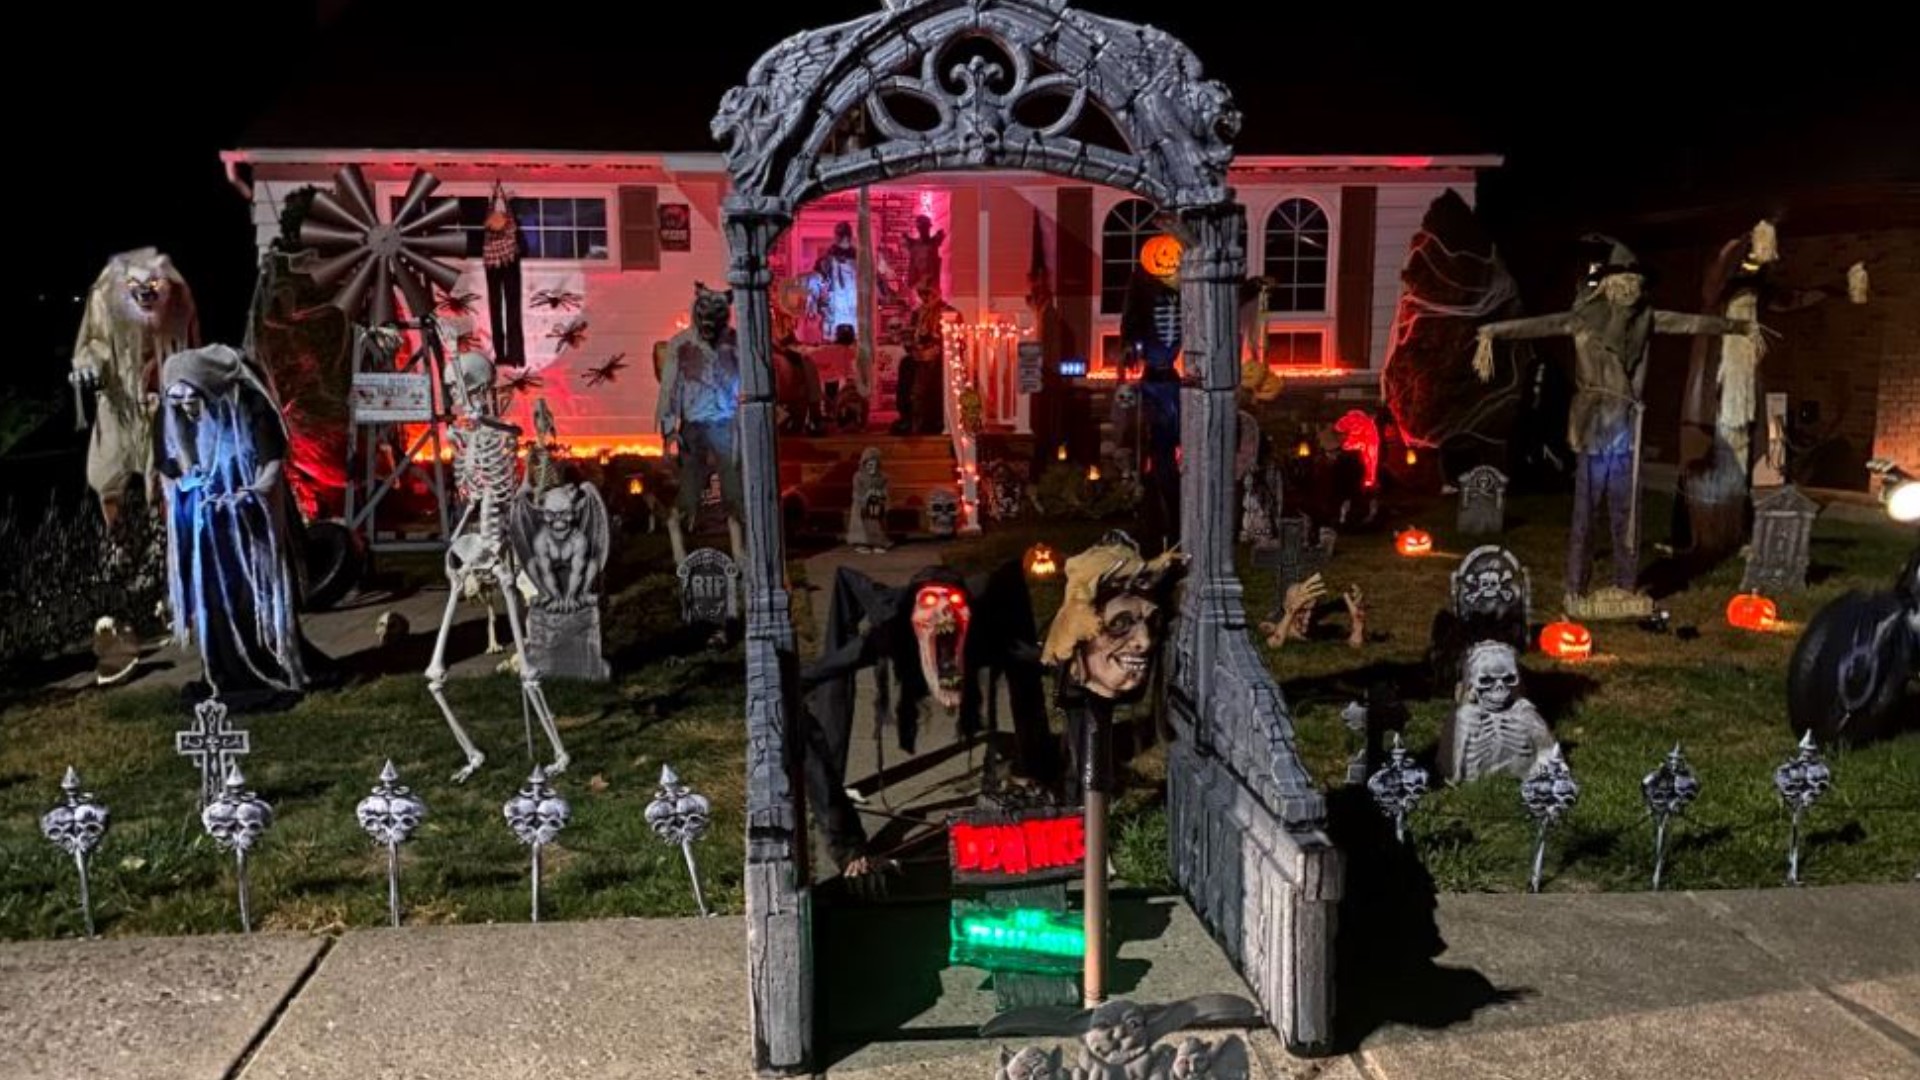 All out Halloween decorating during pandemic causing sales to soar ...